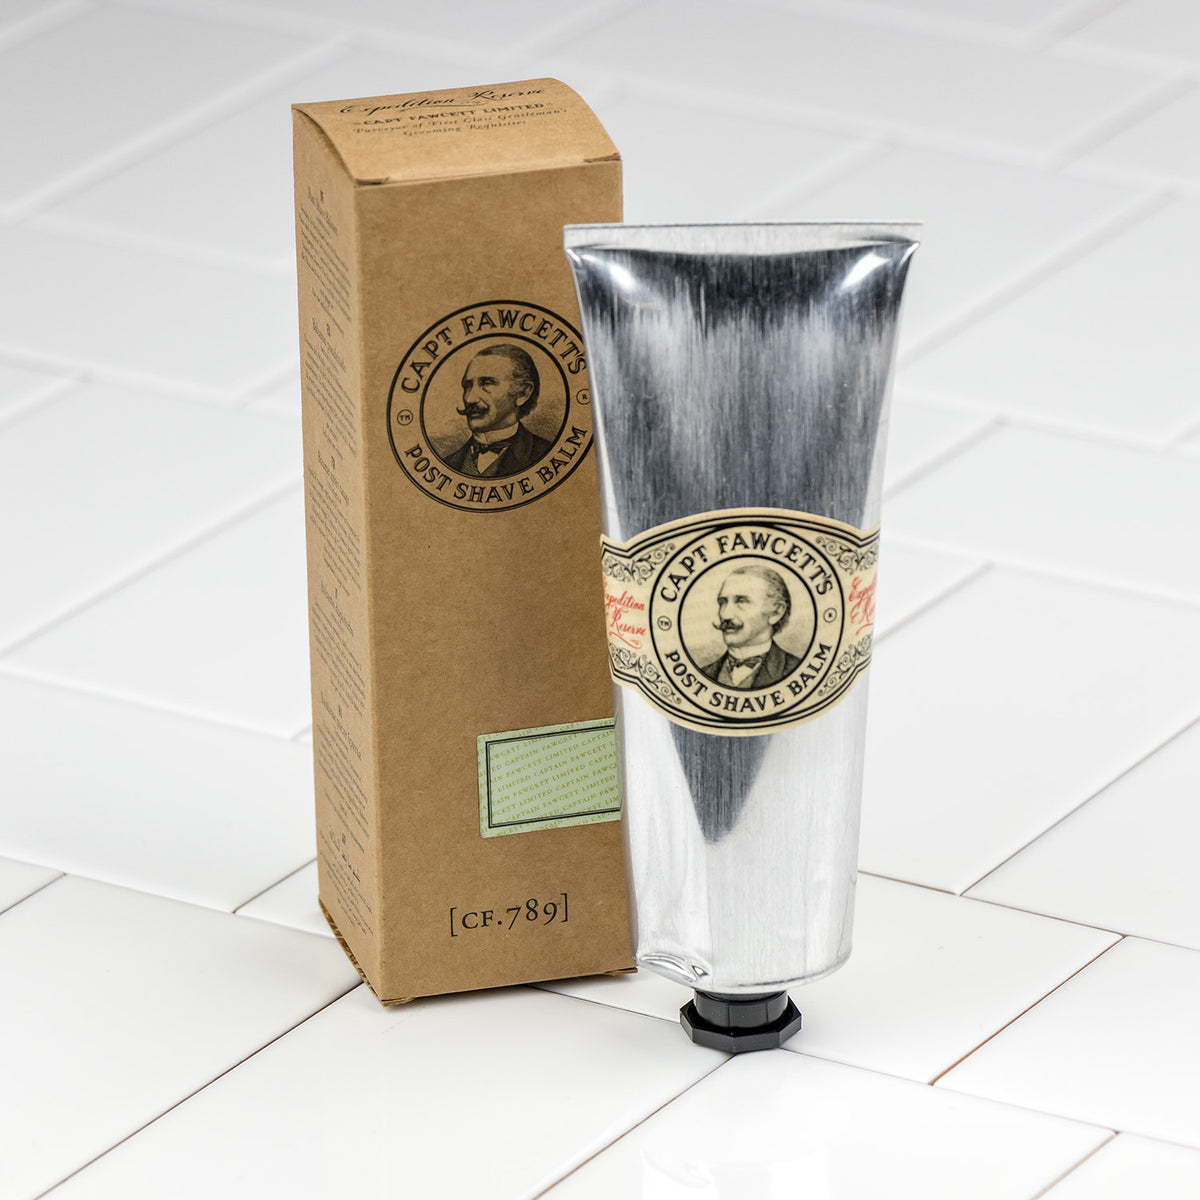 Captain Fawcett&#39;s Expedition Reserve Post Shave Balm